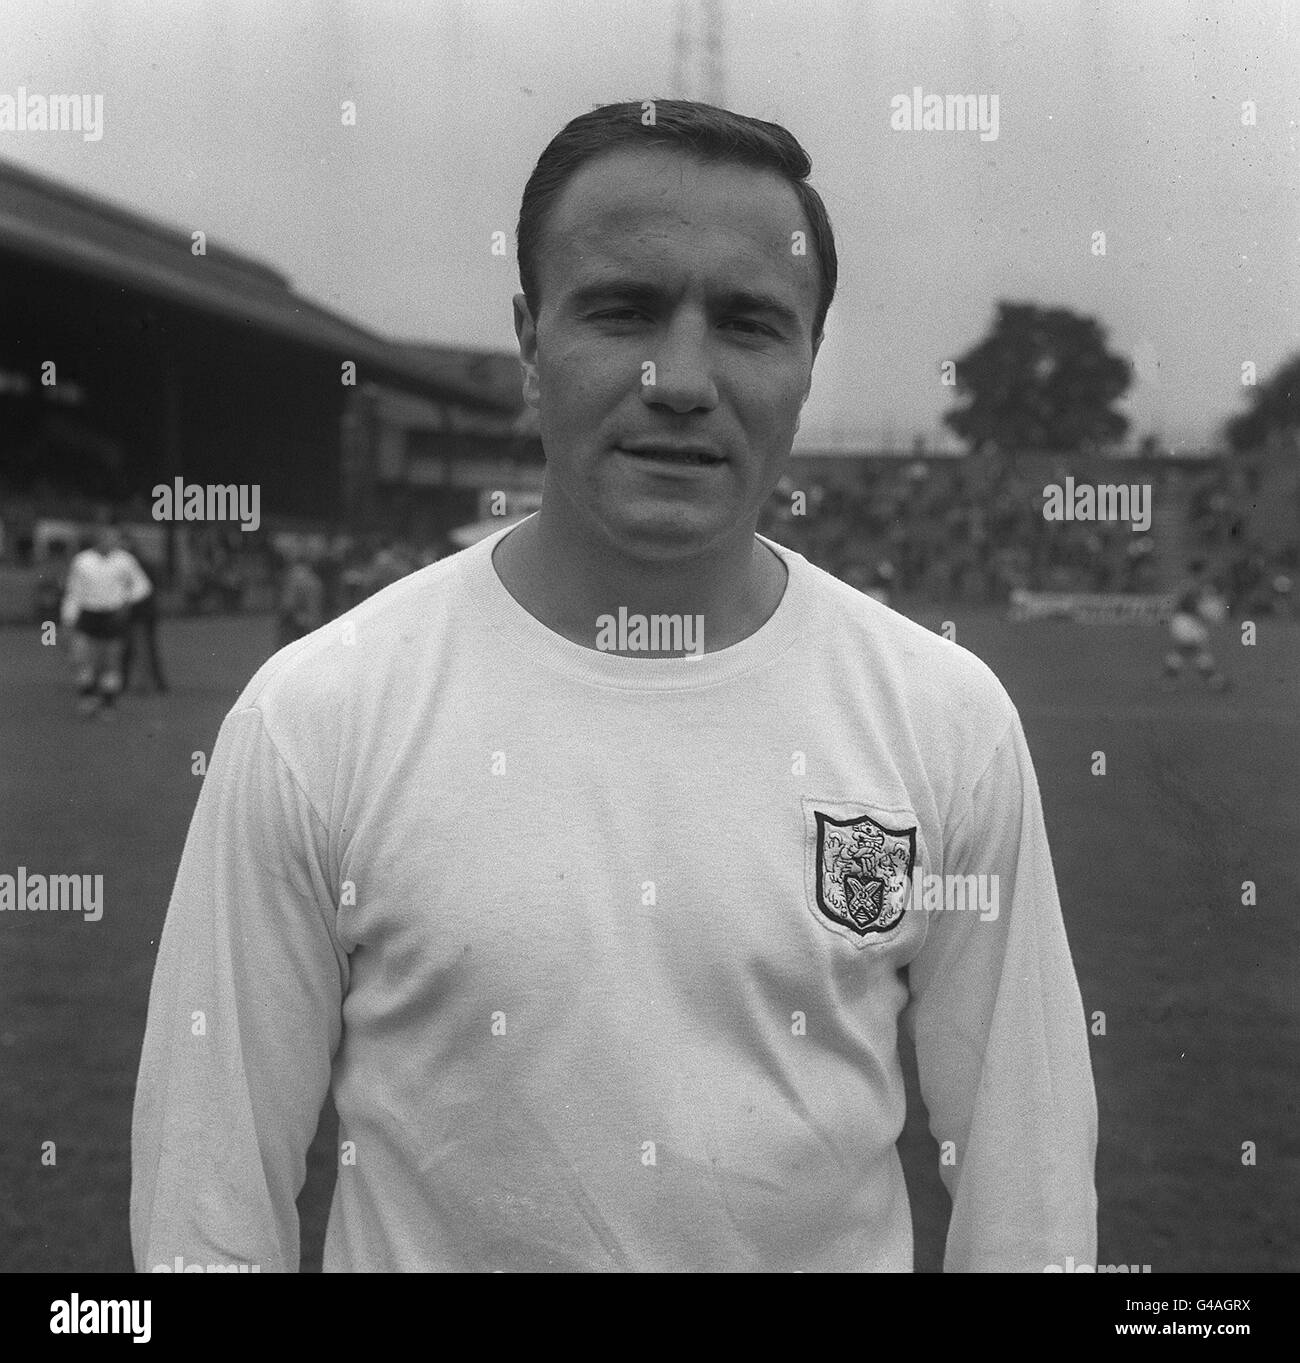 PA NEWS PHOTO 29/6/66 GEORGE COHEN OF FULHAM F.C. Stock Photo